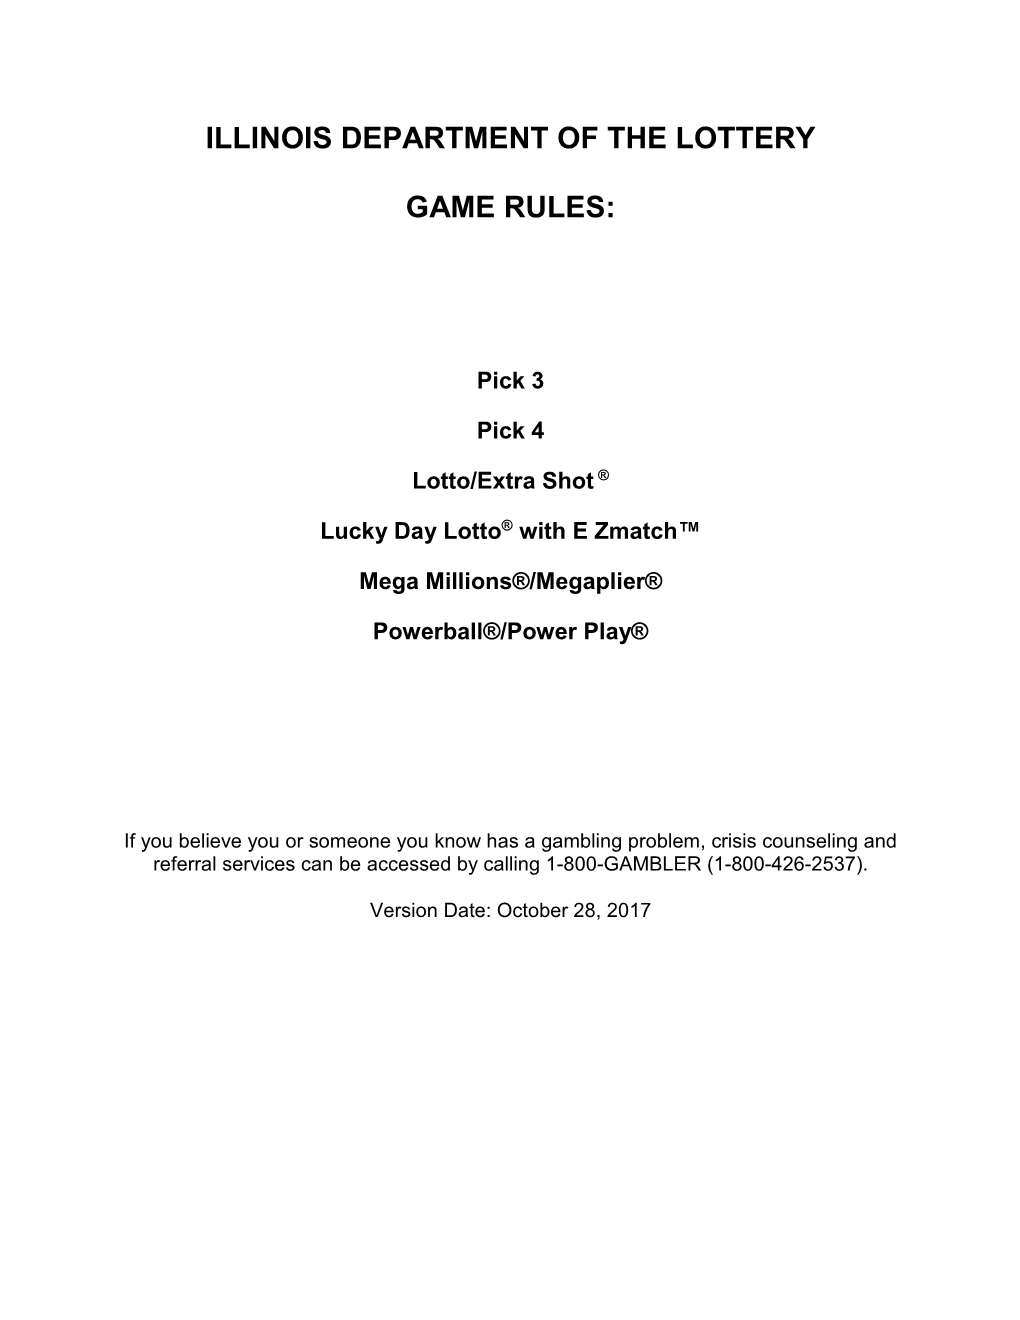 Illinois Department of the Lottery Game Rules